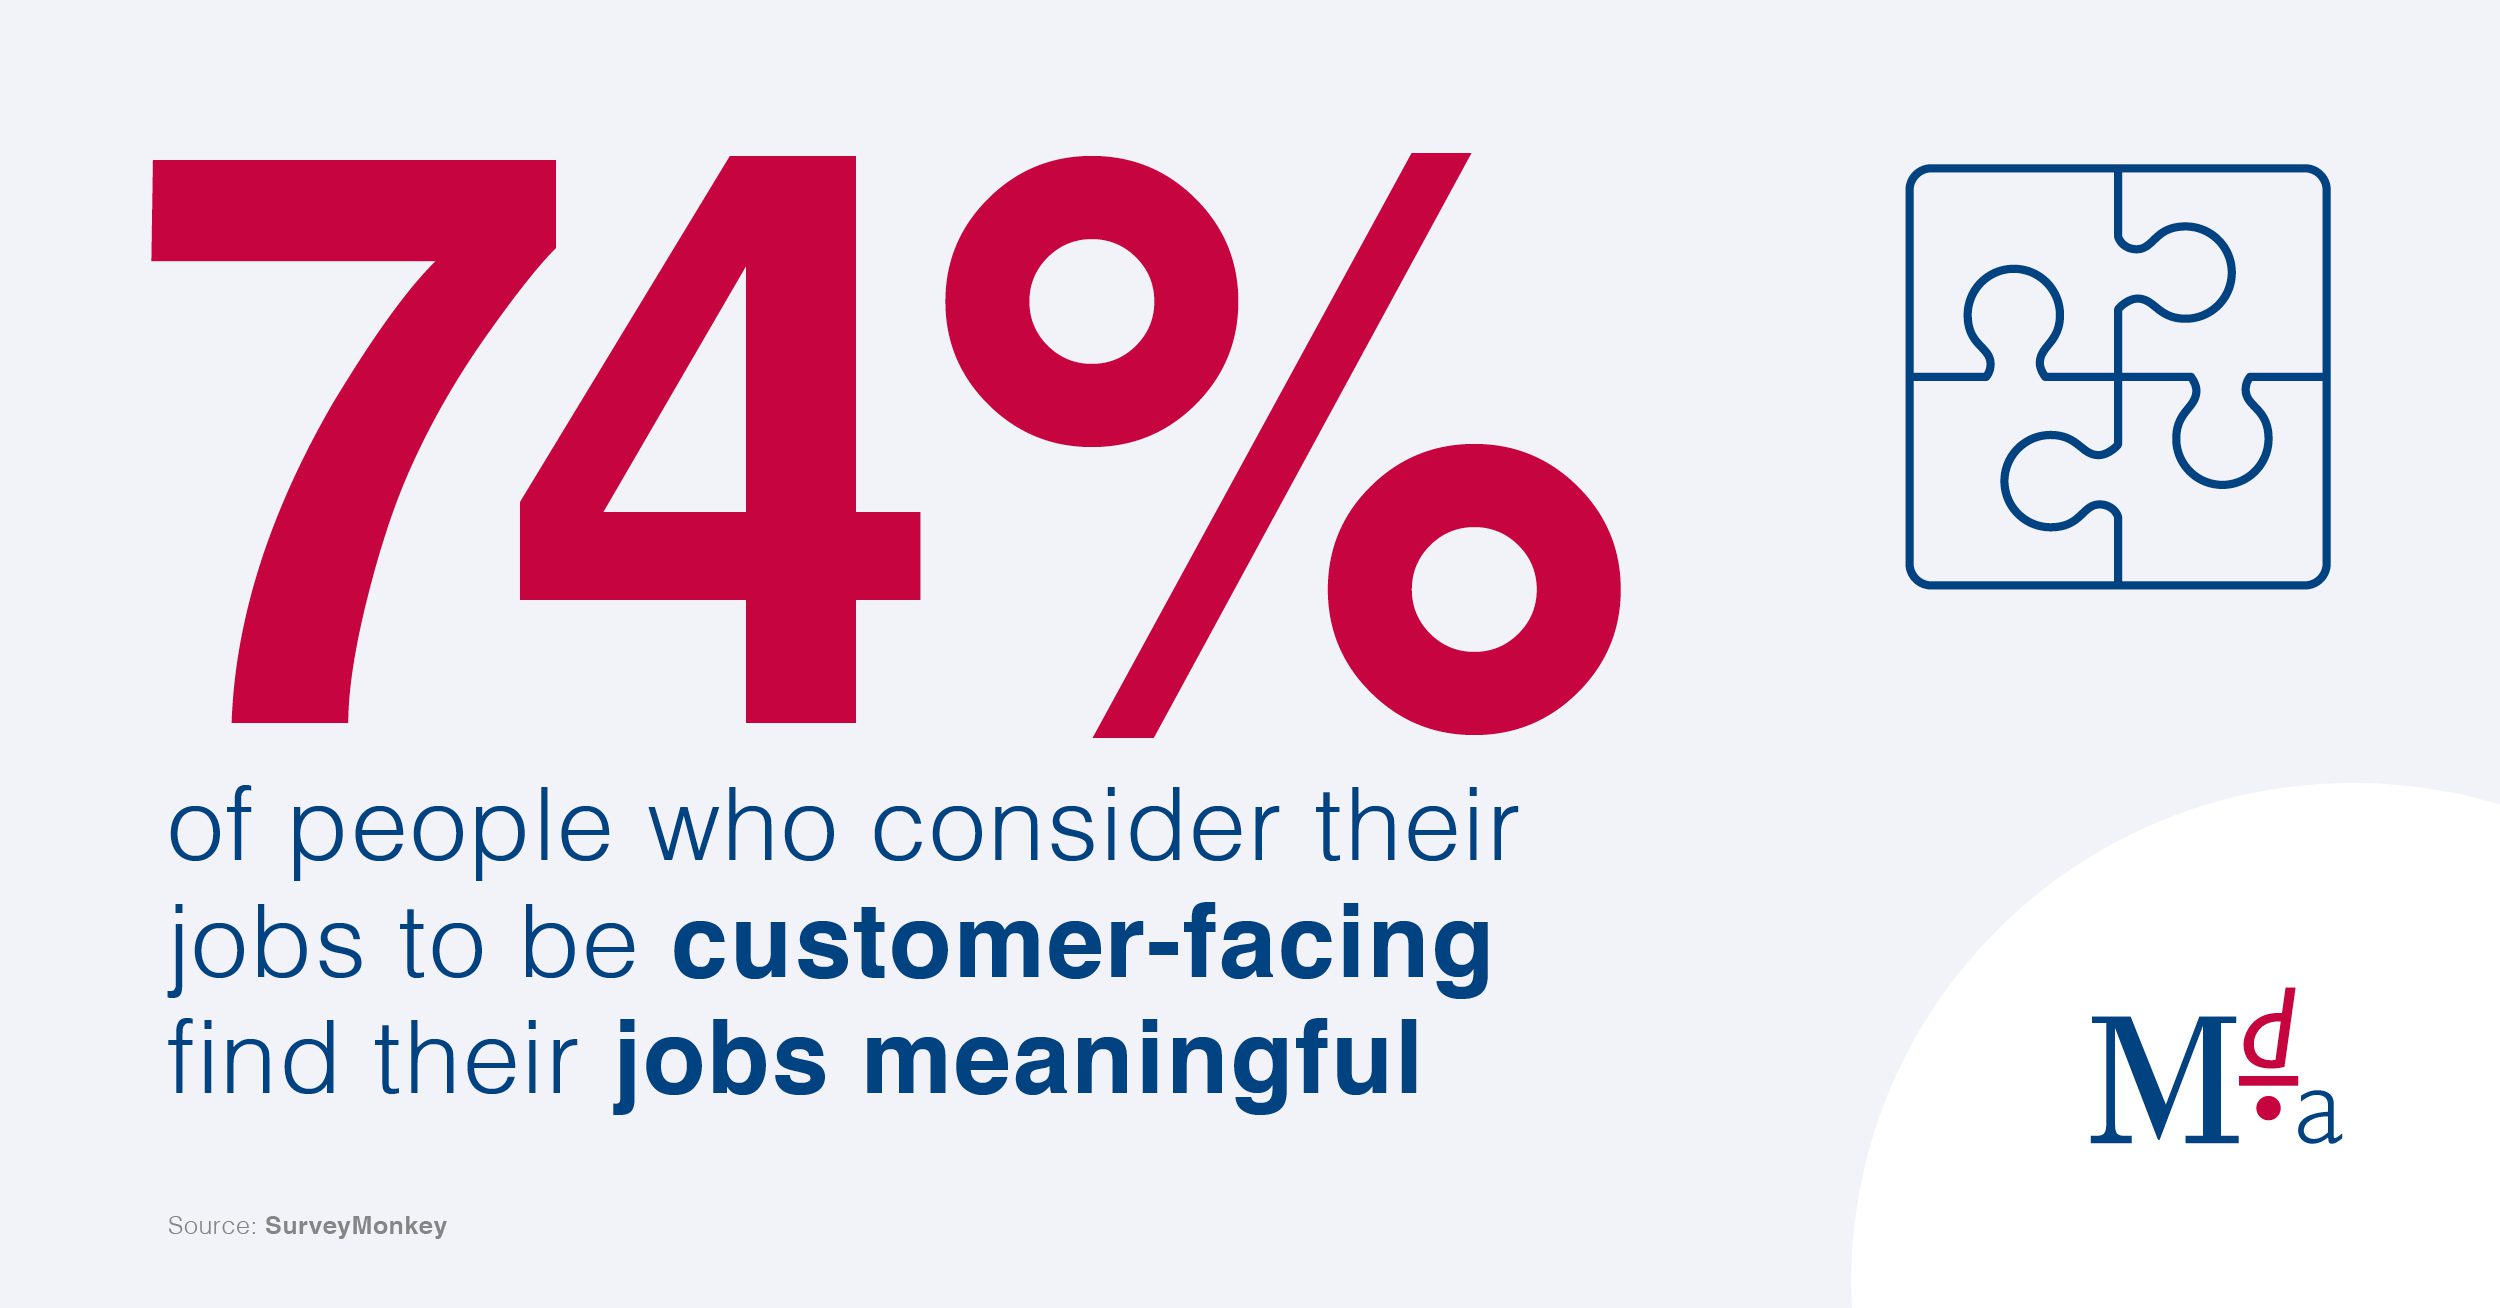 74% of people who consider their jobs to be customer-facing find their jobs meaningful